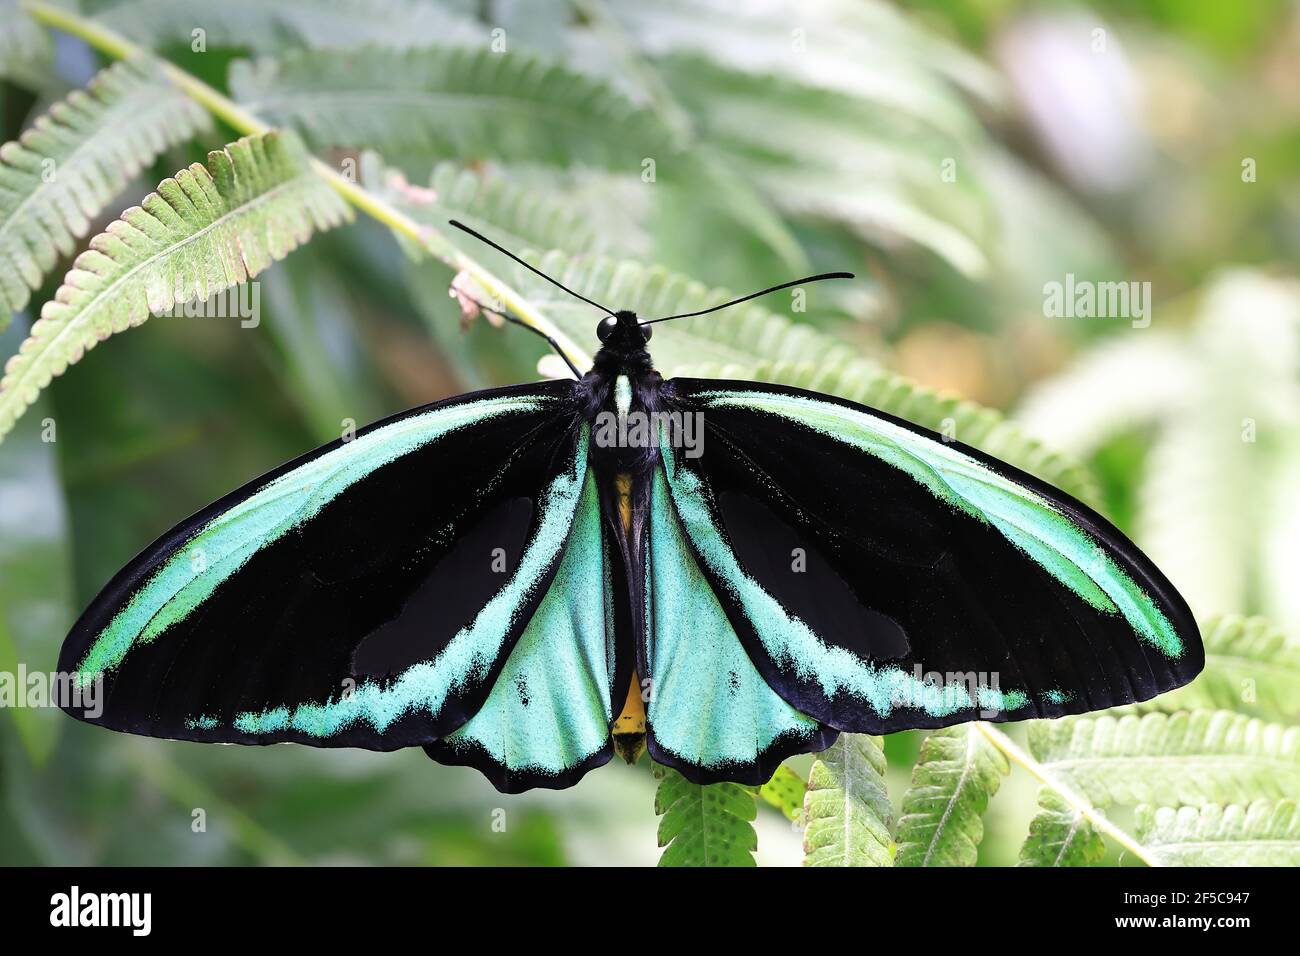 A beautiful male Cairns Birdwing butterfly resting on a leaf with wings open. Stock Photo